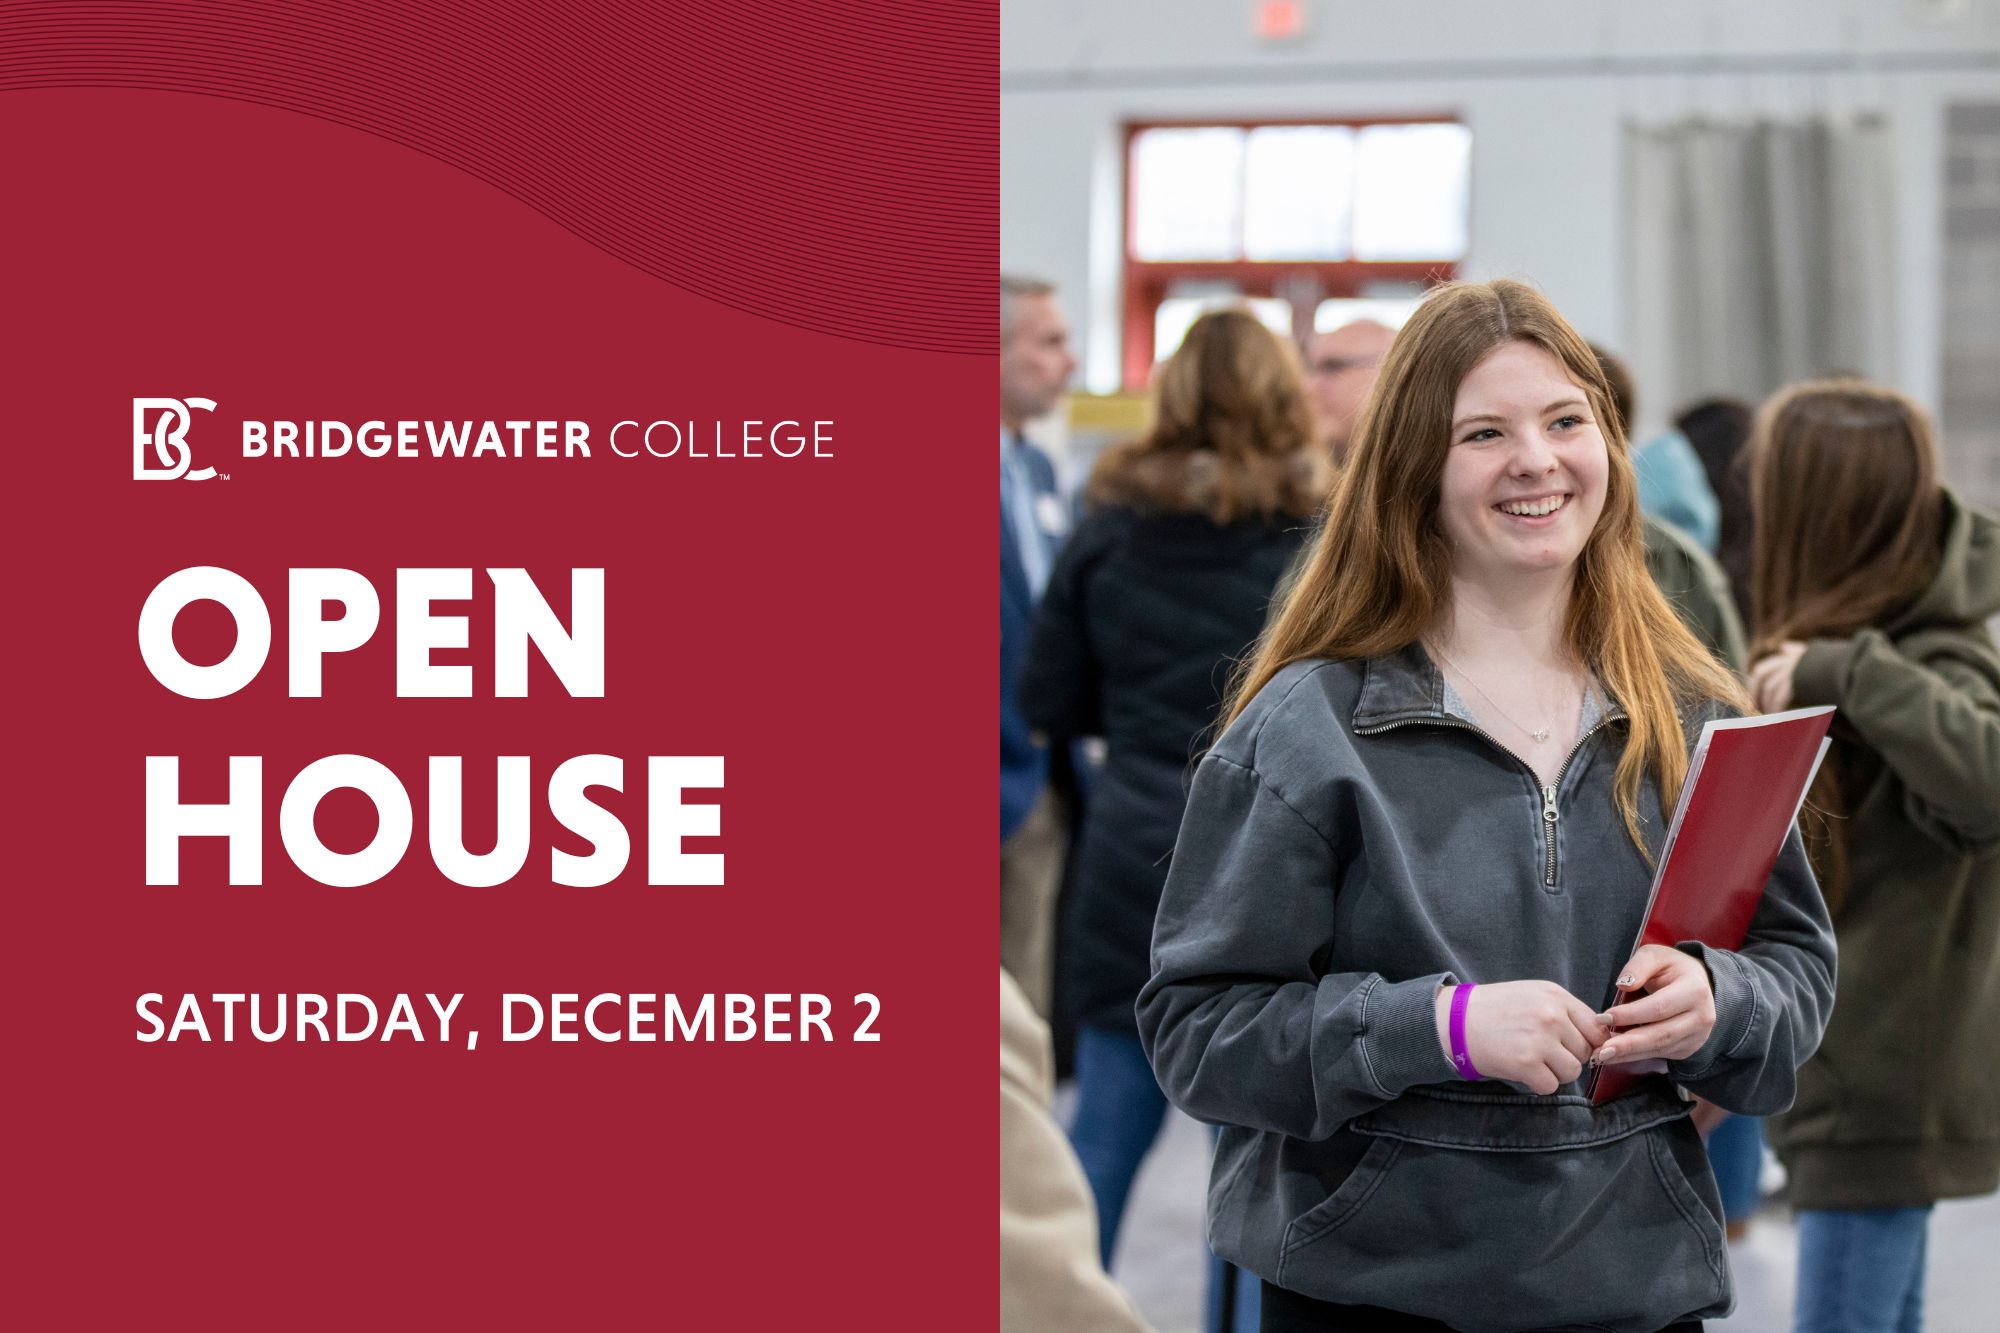 Bridgewater College Open House Saturday, December 2 text on red background with picture of a girl smiling while holding a red folder